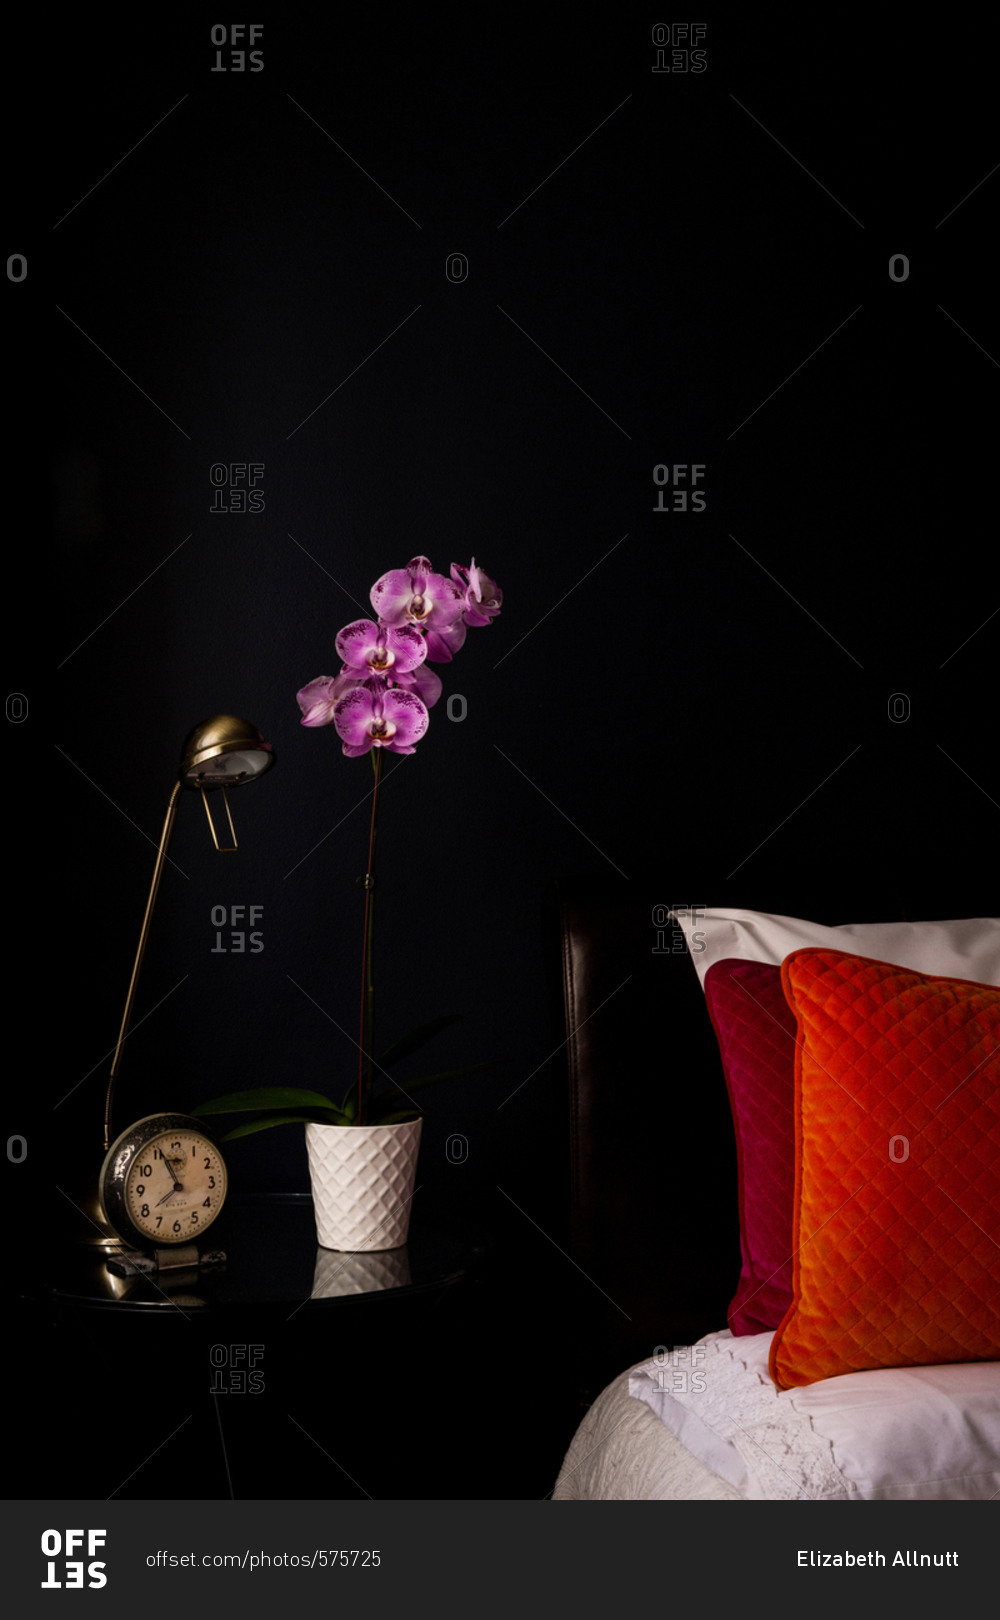 Nightstand with potted orchid, alarm clock, and lamp next to bed